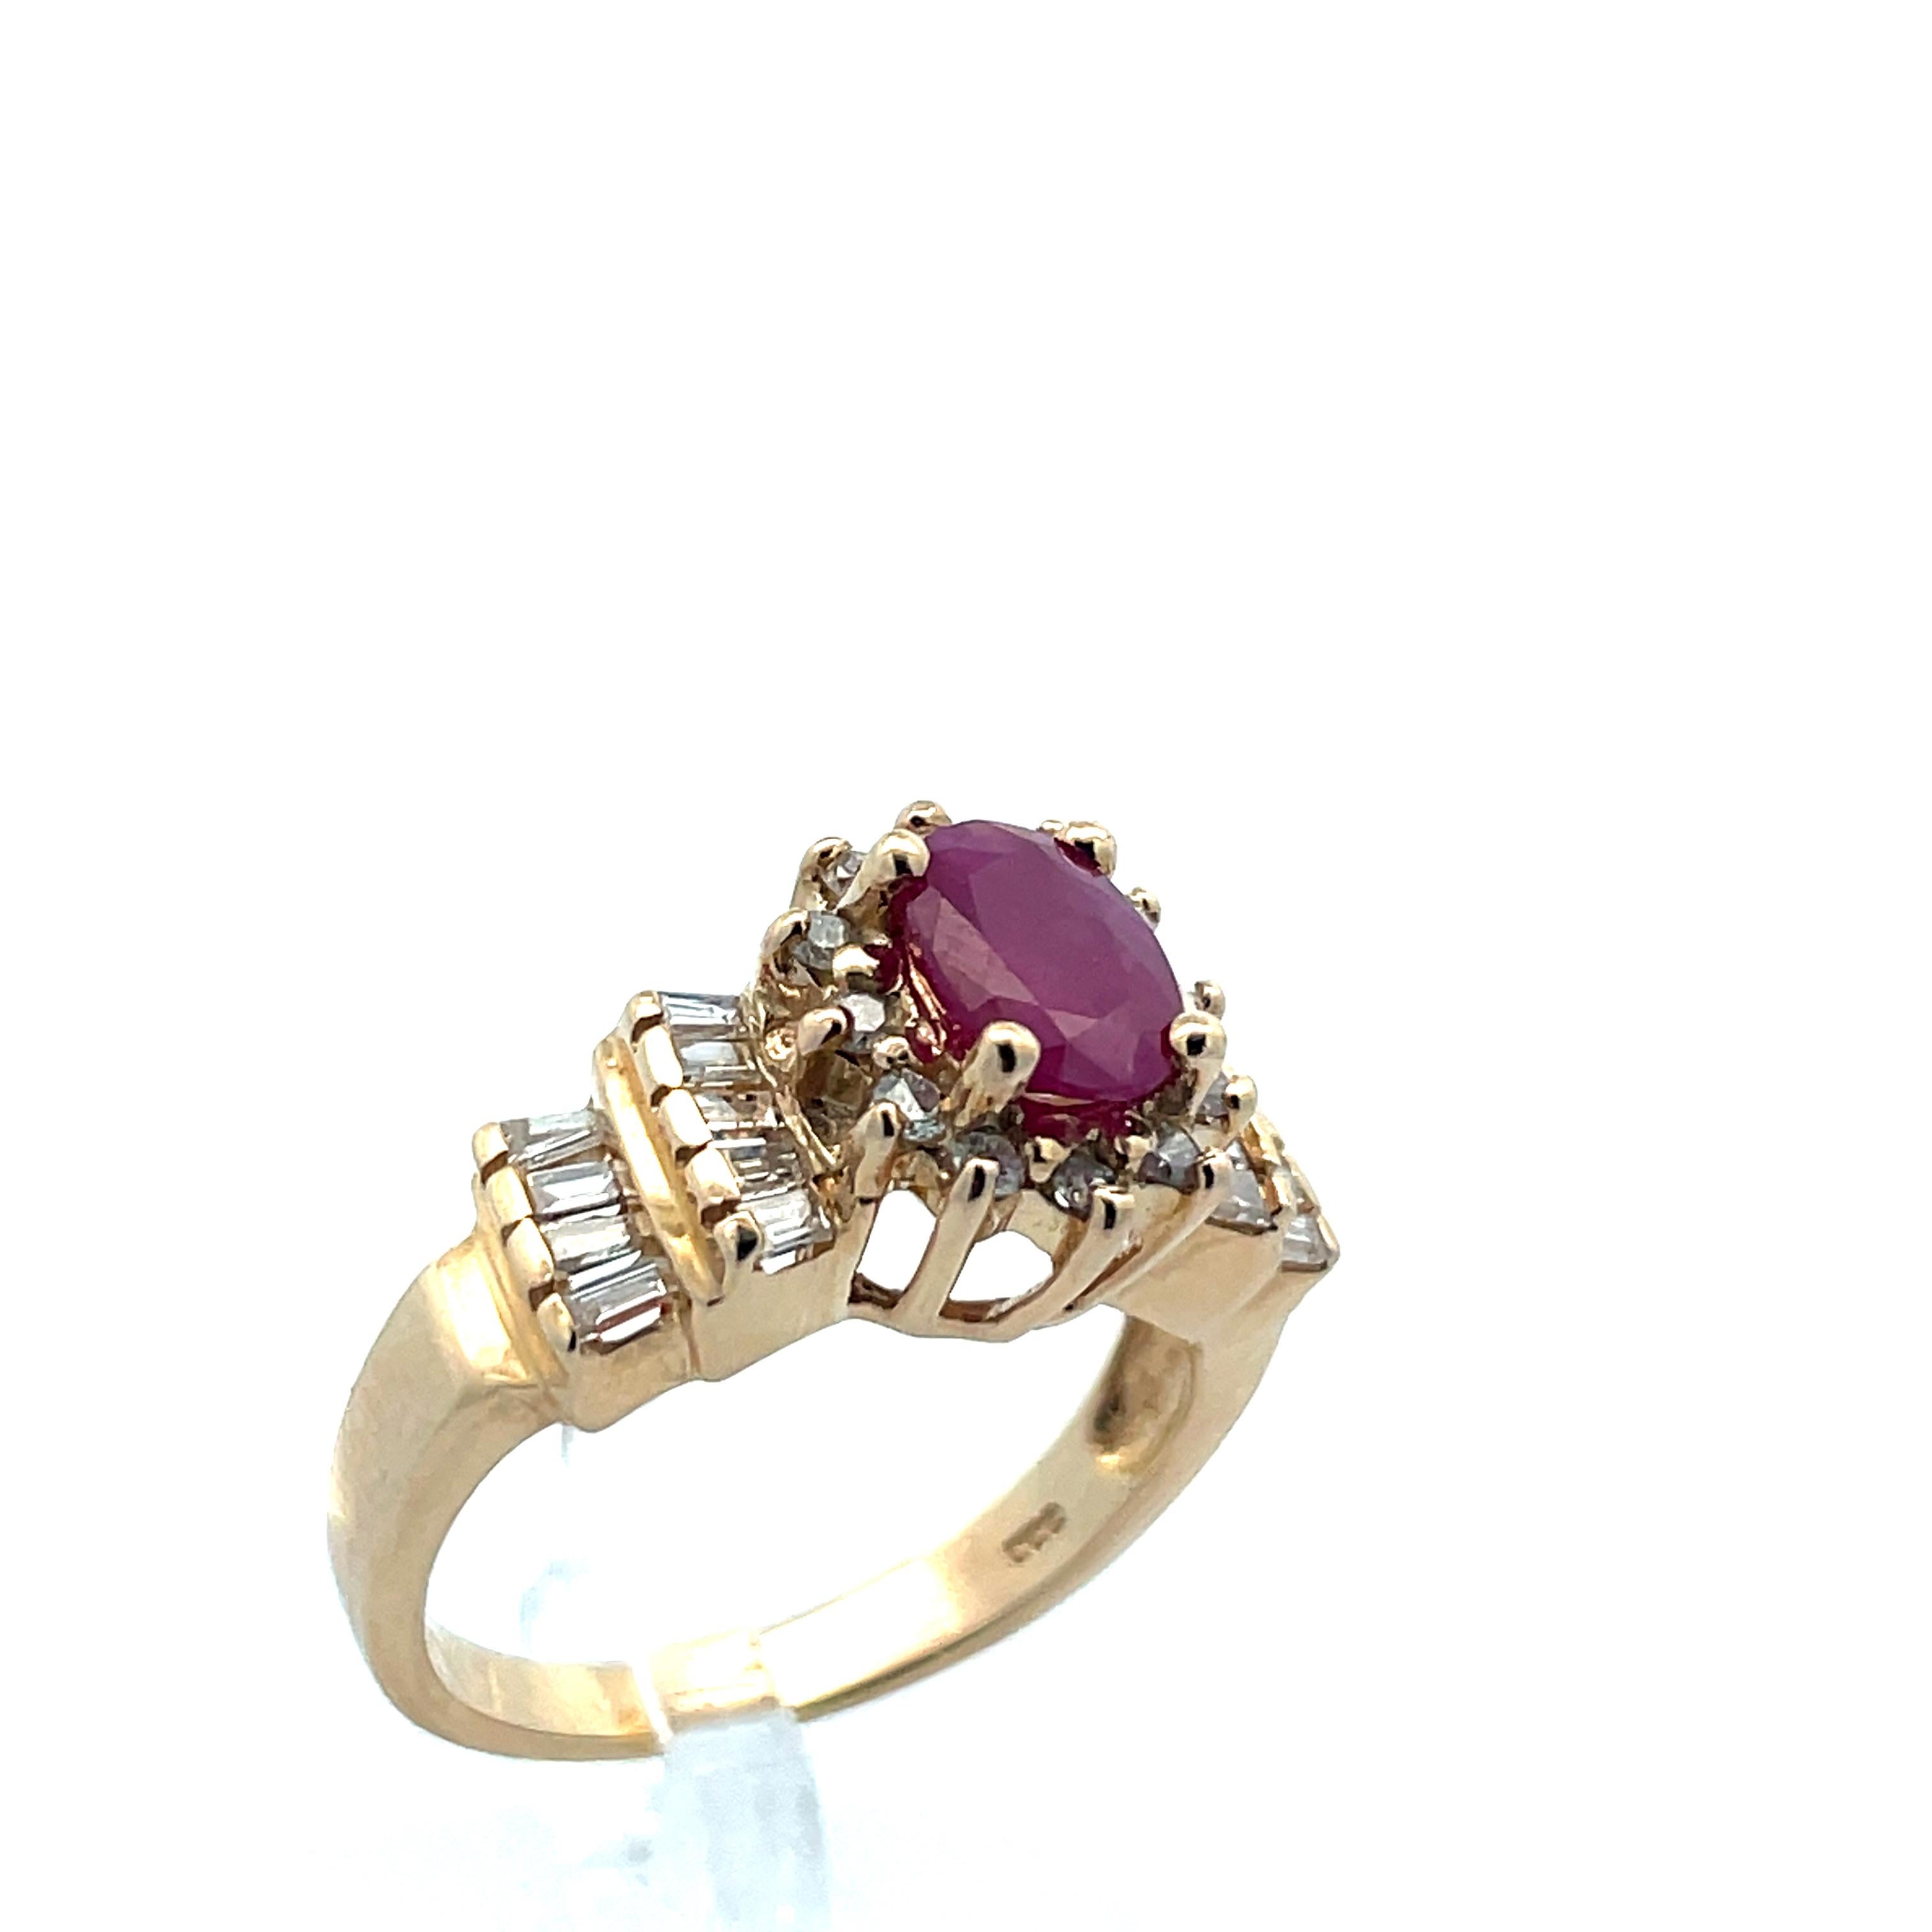 - 14K Yellow Gold 
- 18 = 0.36 twt Baguette cut diamond
- .94 CT Round cut ruby 
- Contemporary 
- Size 6.5 
4.49 Grams 

The is an absolutely stunning contemporary ring made in 14k yellow gold, featuring ruby and diamond. This ring contains 19